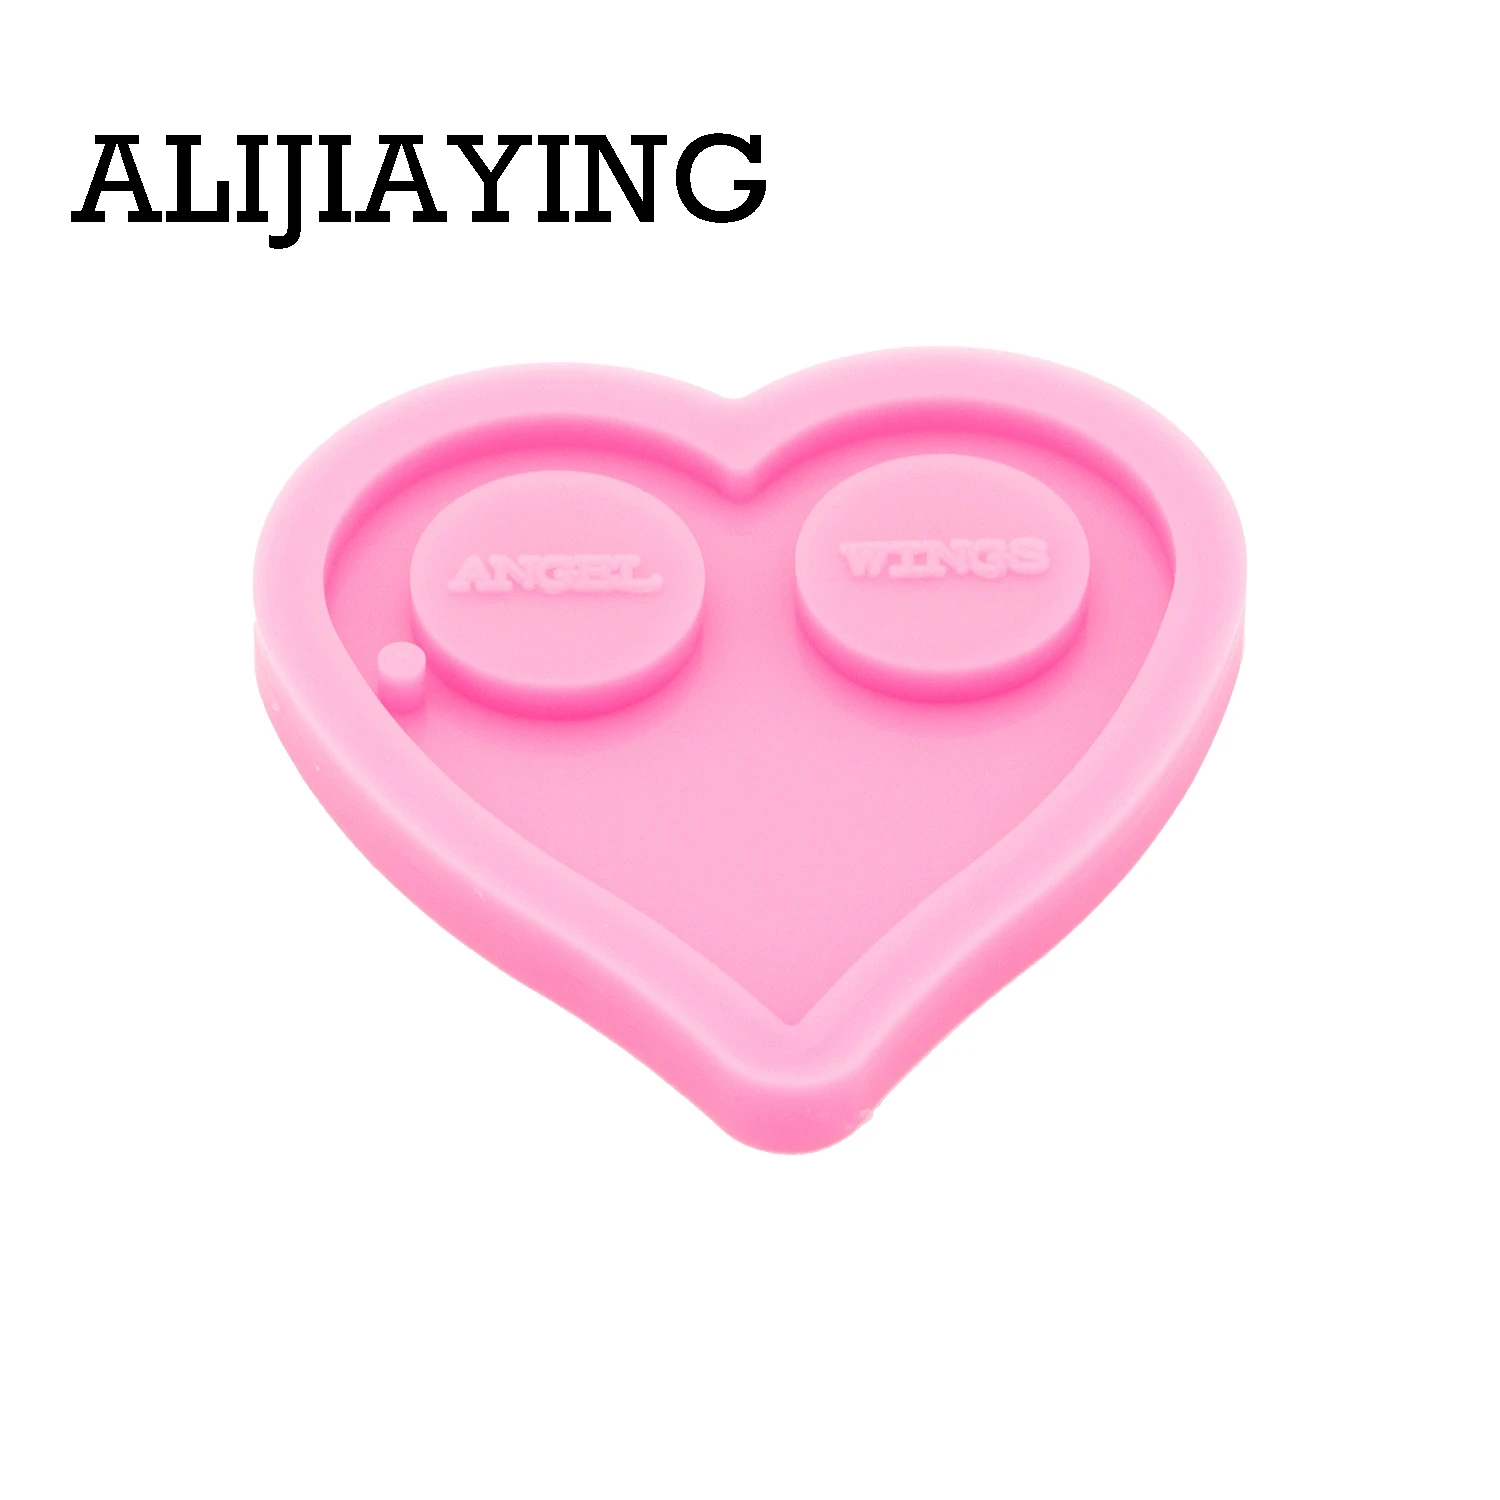 DY0753 Glossy Defense Heart Resin Keychain Mold,Self-defense Unicorn/Dog Silicone mold, Mould for Epoxy Making DIY Crafts